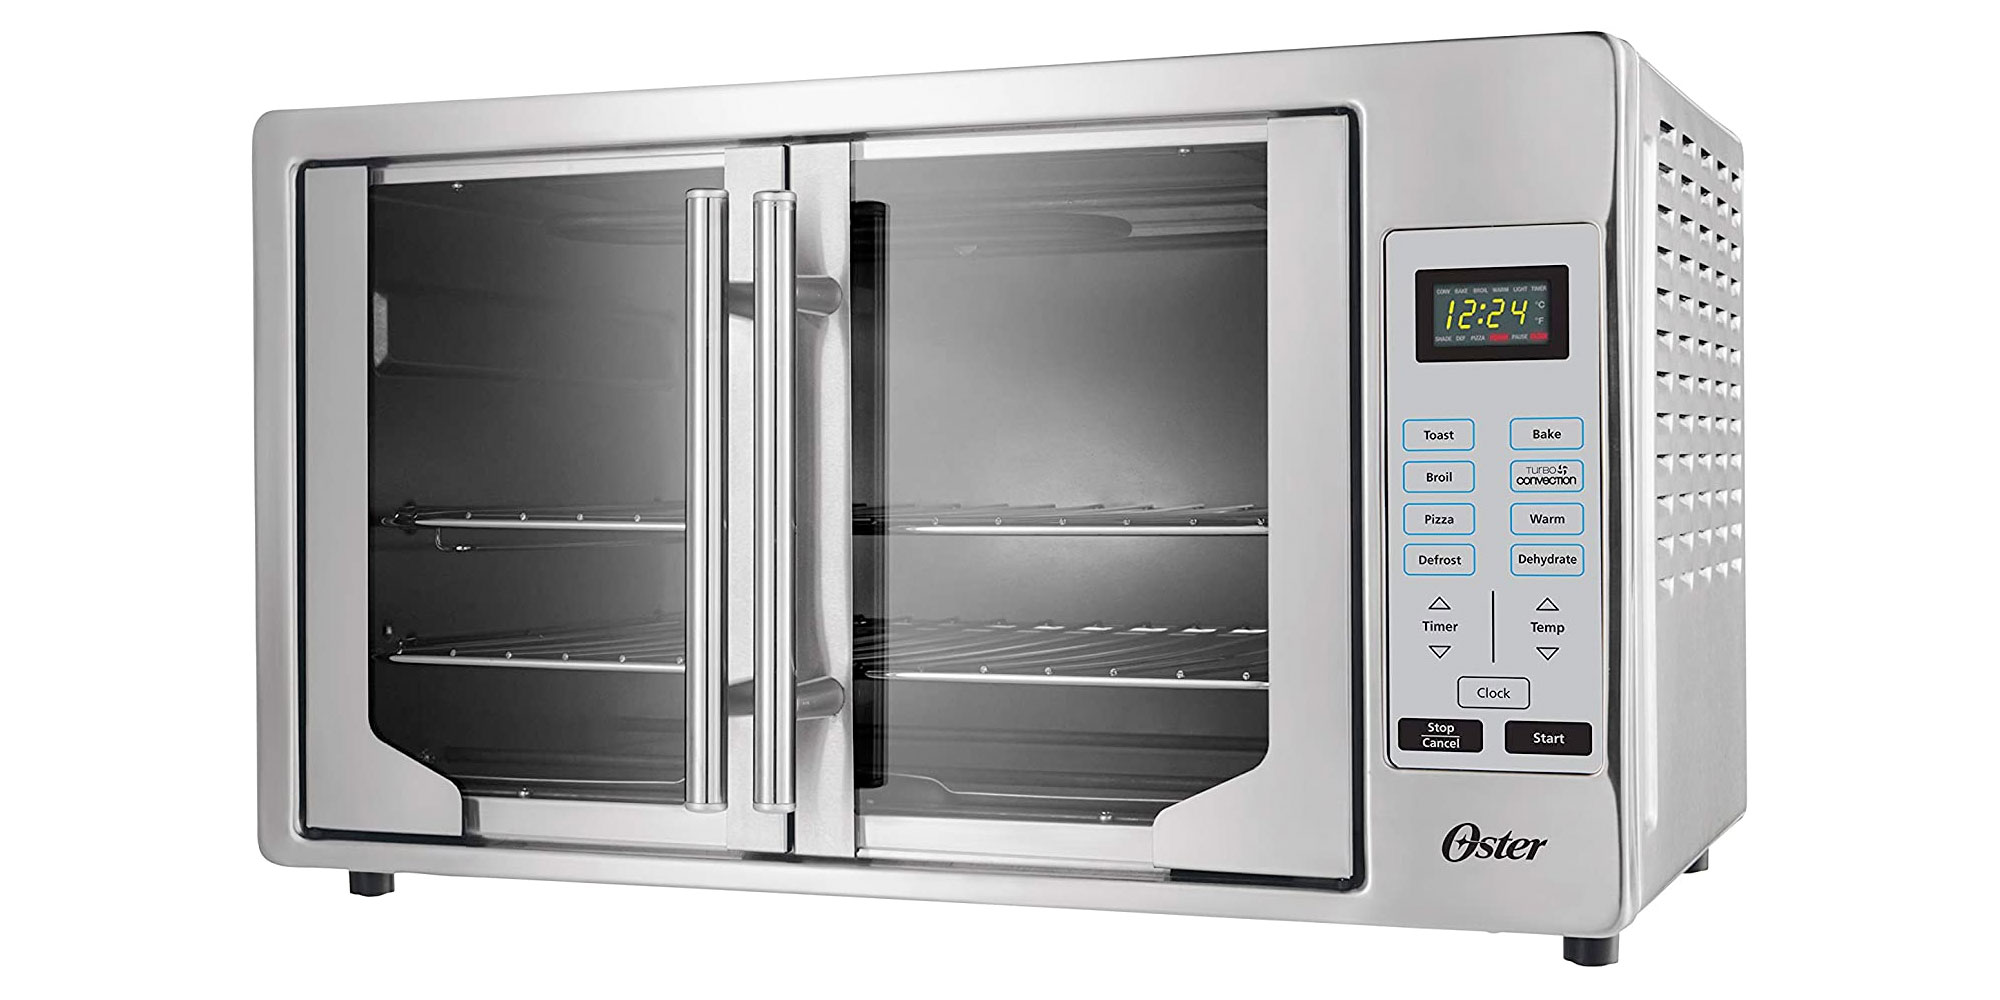 https://9to5toys.com/wp-content/uploads/sites/5/2020/08/oster-french-door-oven.jpg